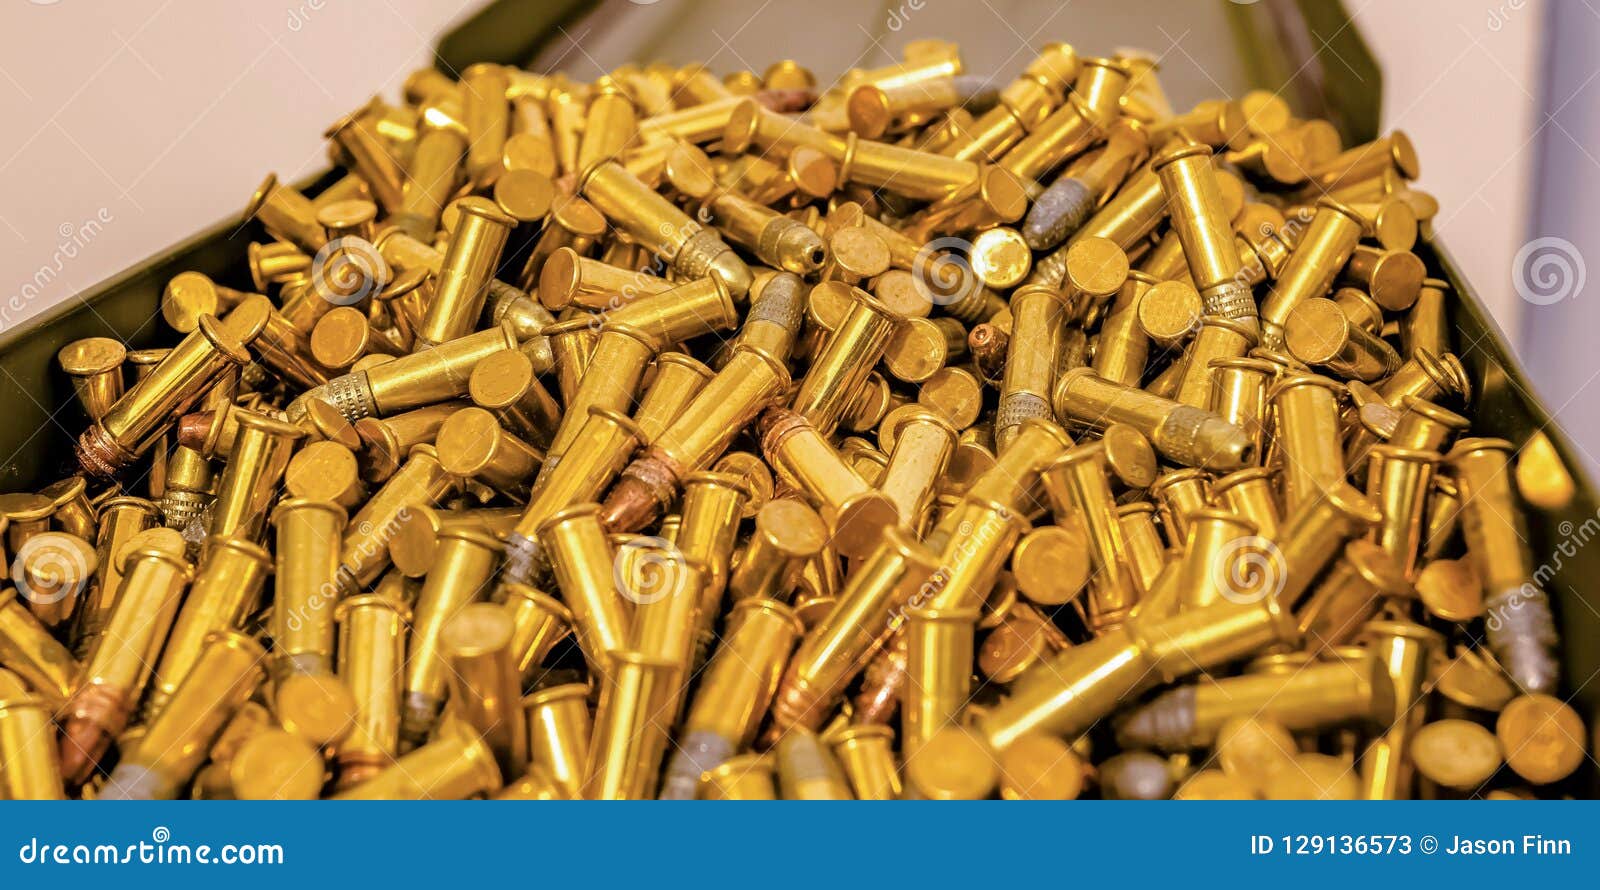 https://thumbs.dreamstime.com/z/metal-box-filled-cylindrical-golden-bullets-metal-box-filled-cylindrical-golden-bullets-close-up-view-metal-129136573.jpg